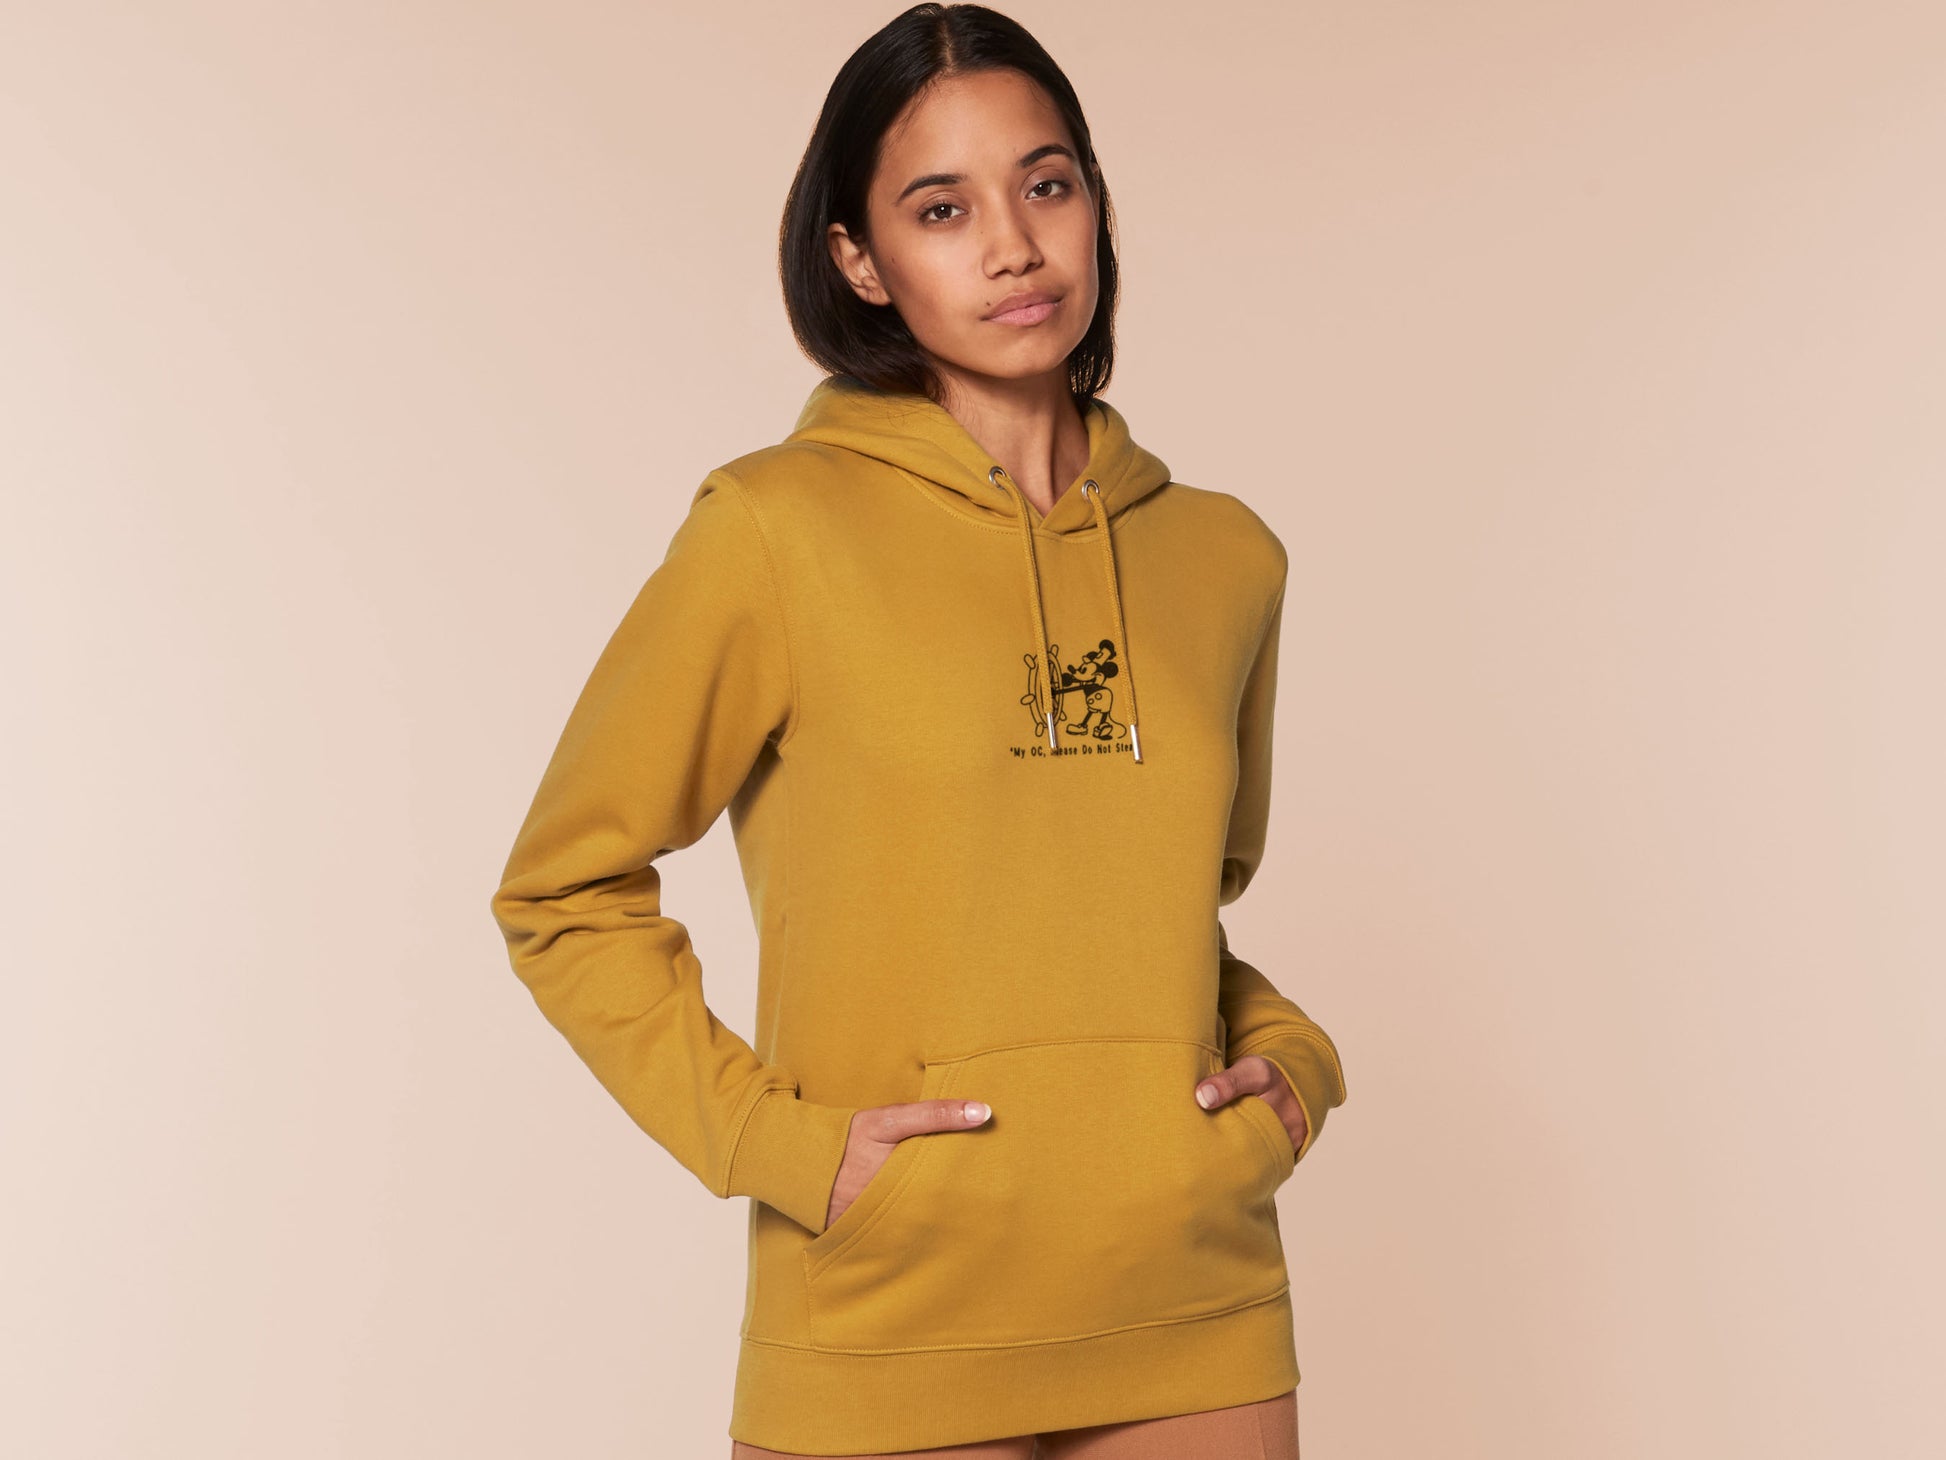 Woman in long sleeved yellow fleece hoodie with an Embroidered Black Steamboat Willie Design From Disney's original Mickey Mouse Animation with the text *My OC, Please Don't Steal.